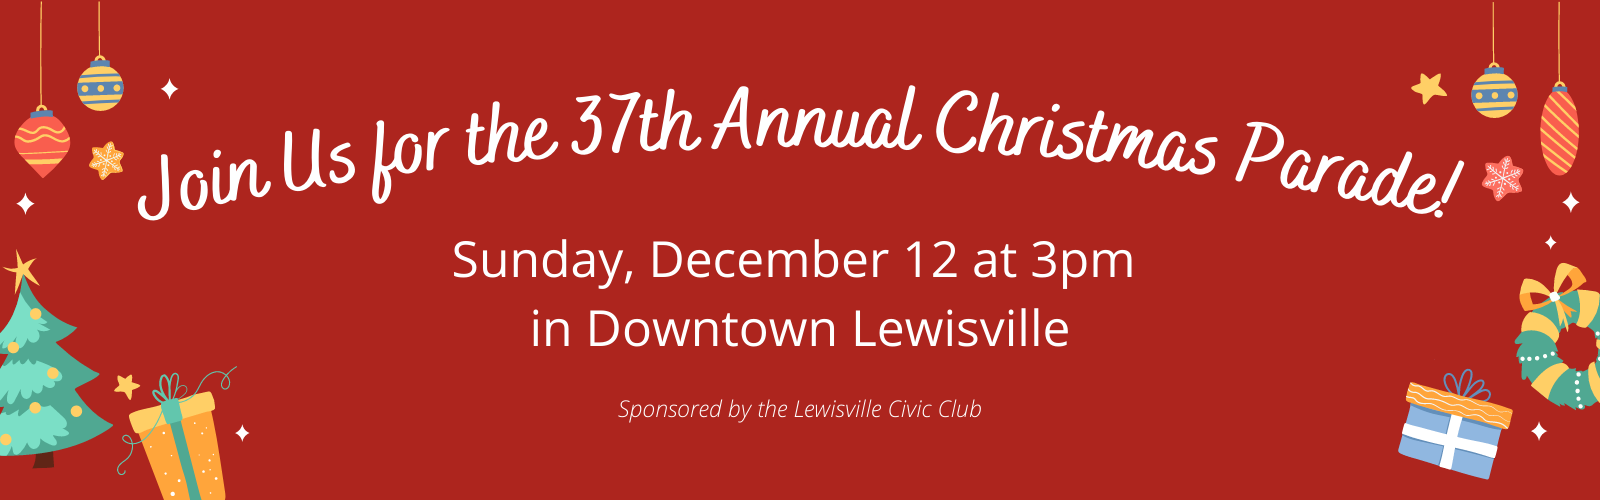 Lewisville Civic Club Plans for 37th Annual Christmas Parade, Sunday